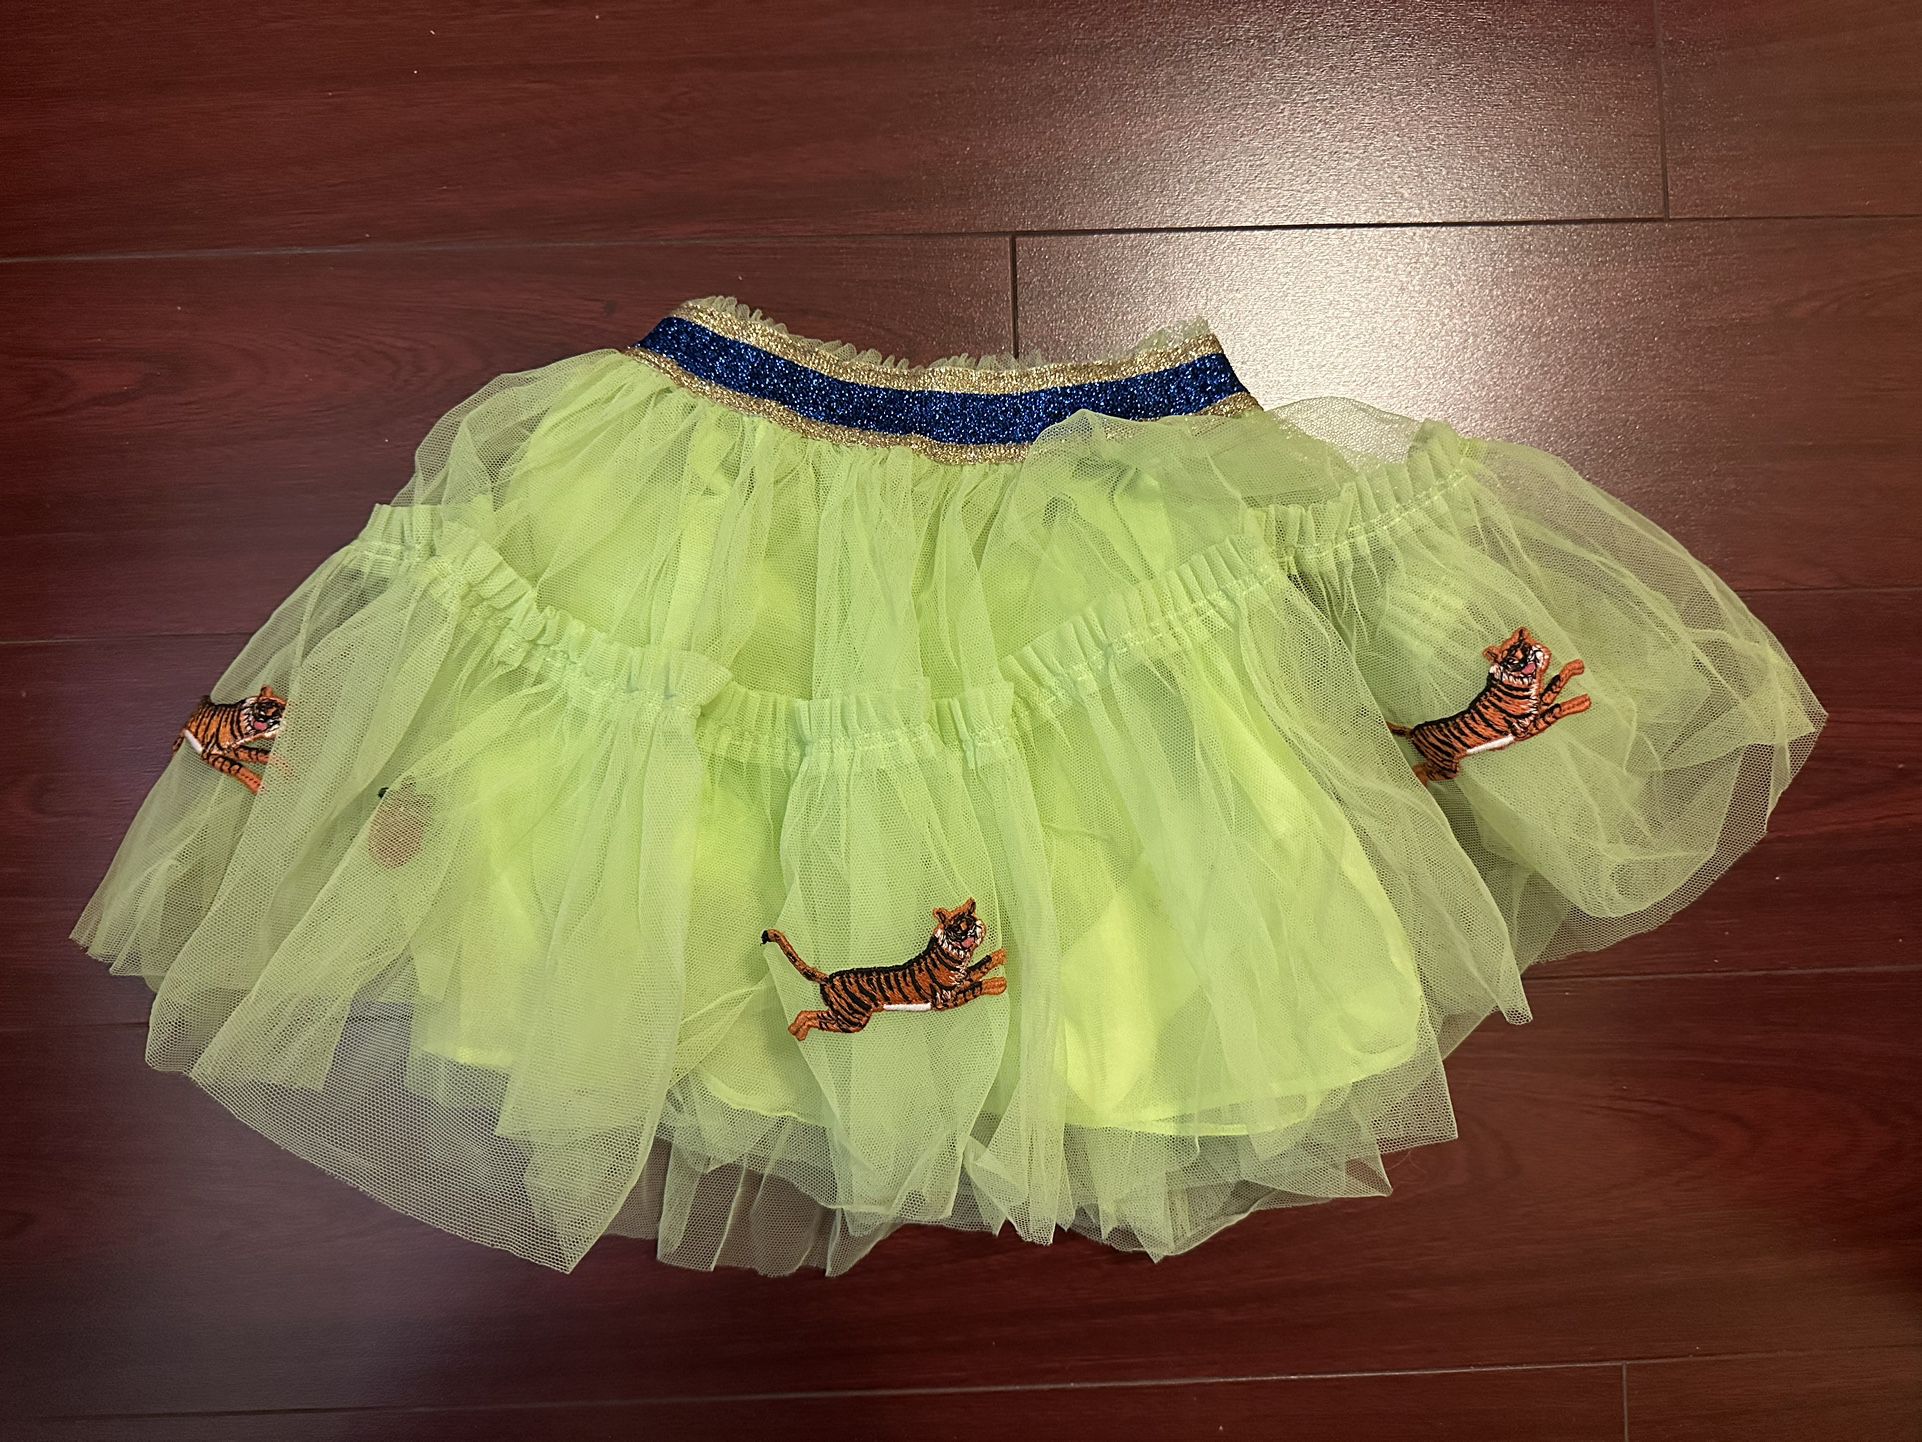 Authentic Gucci baby Lime Green Tulle Layered Skirt toddler Girl’s 36 months